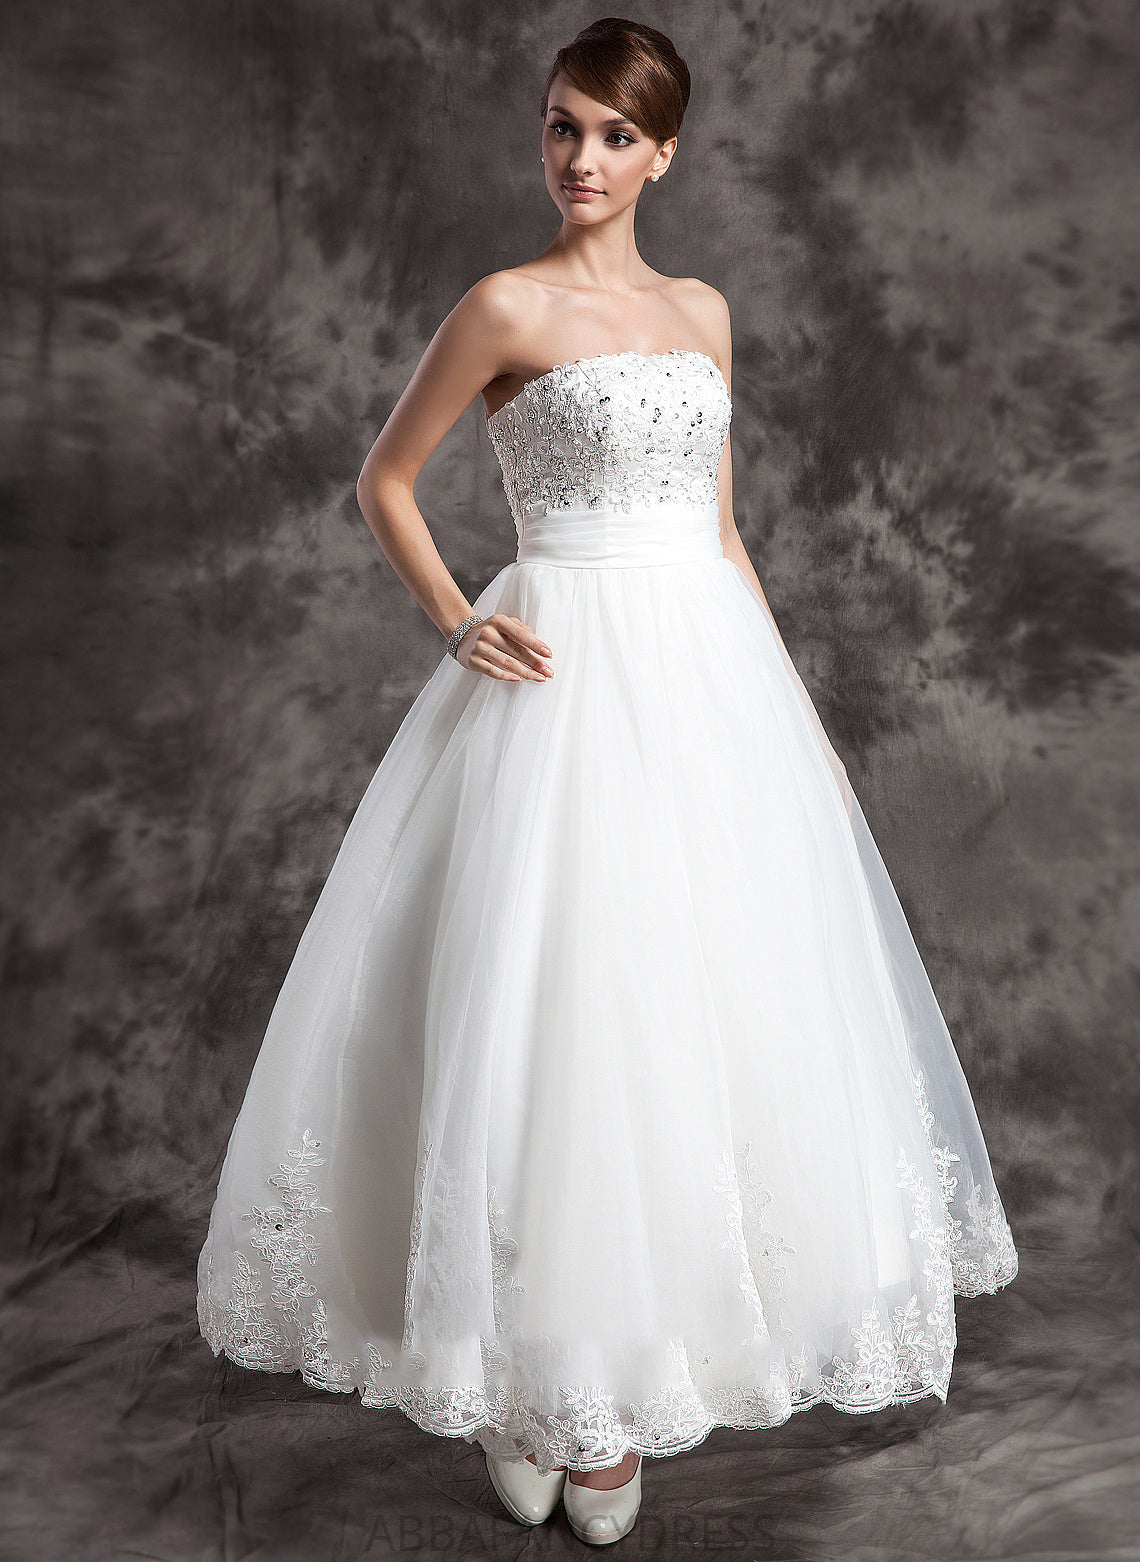 Wedding Beading With Ball-Gown/Princess Strapless Dress Larissa Ankle-Length Wedding Dresses Satin Organza Lace